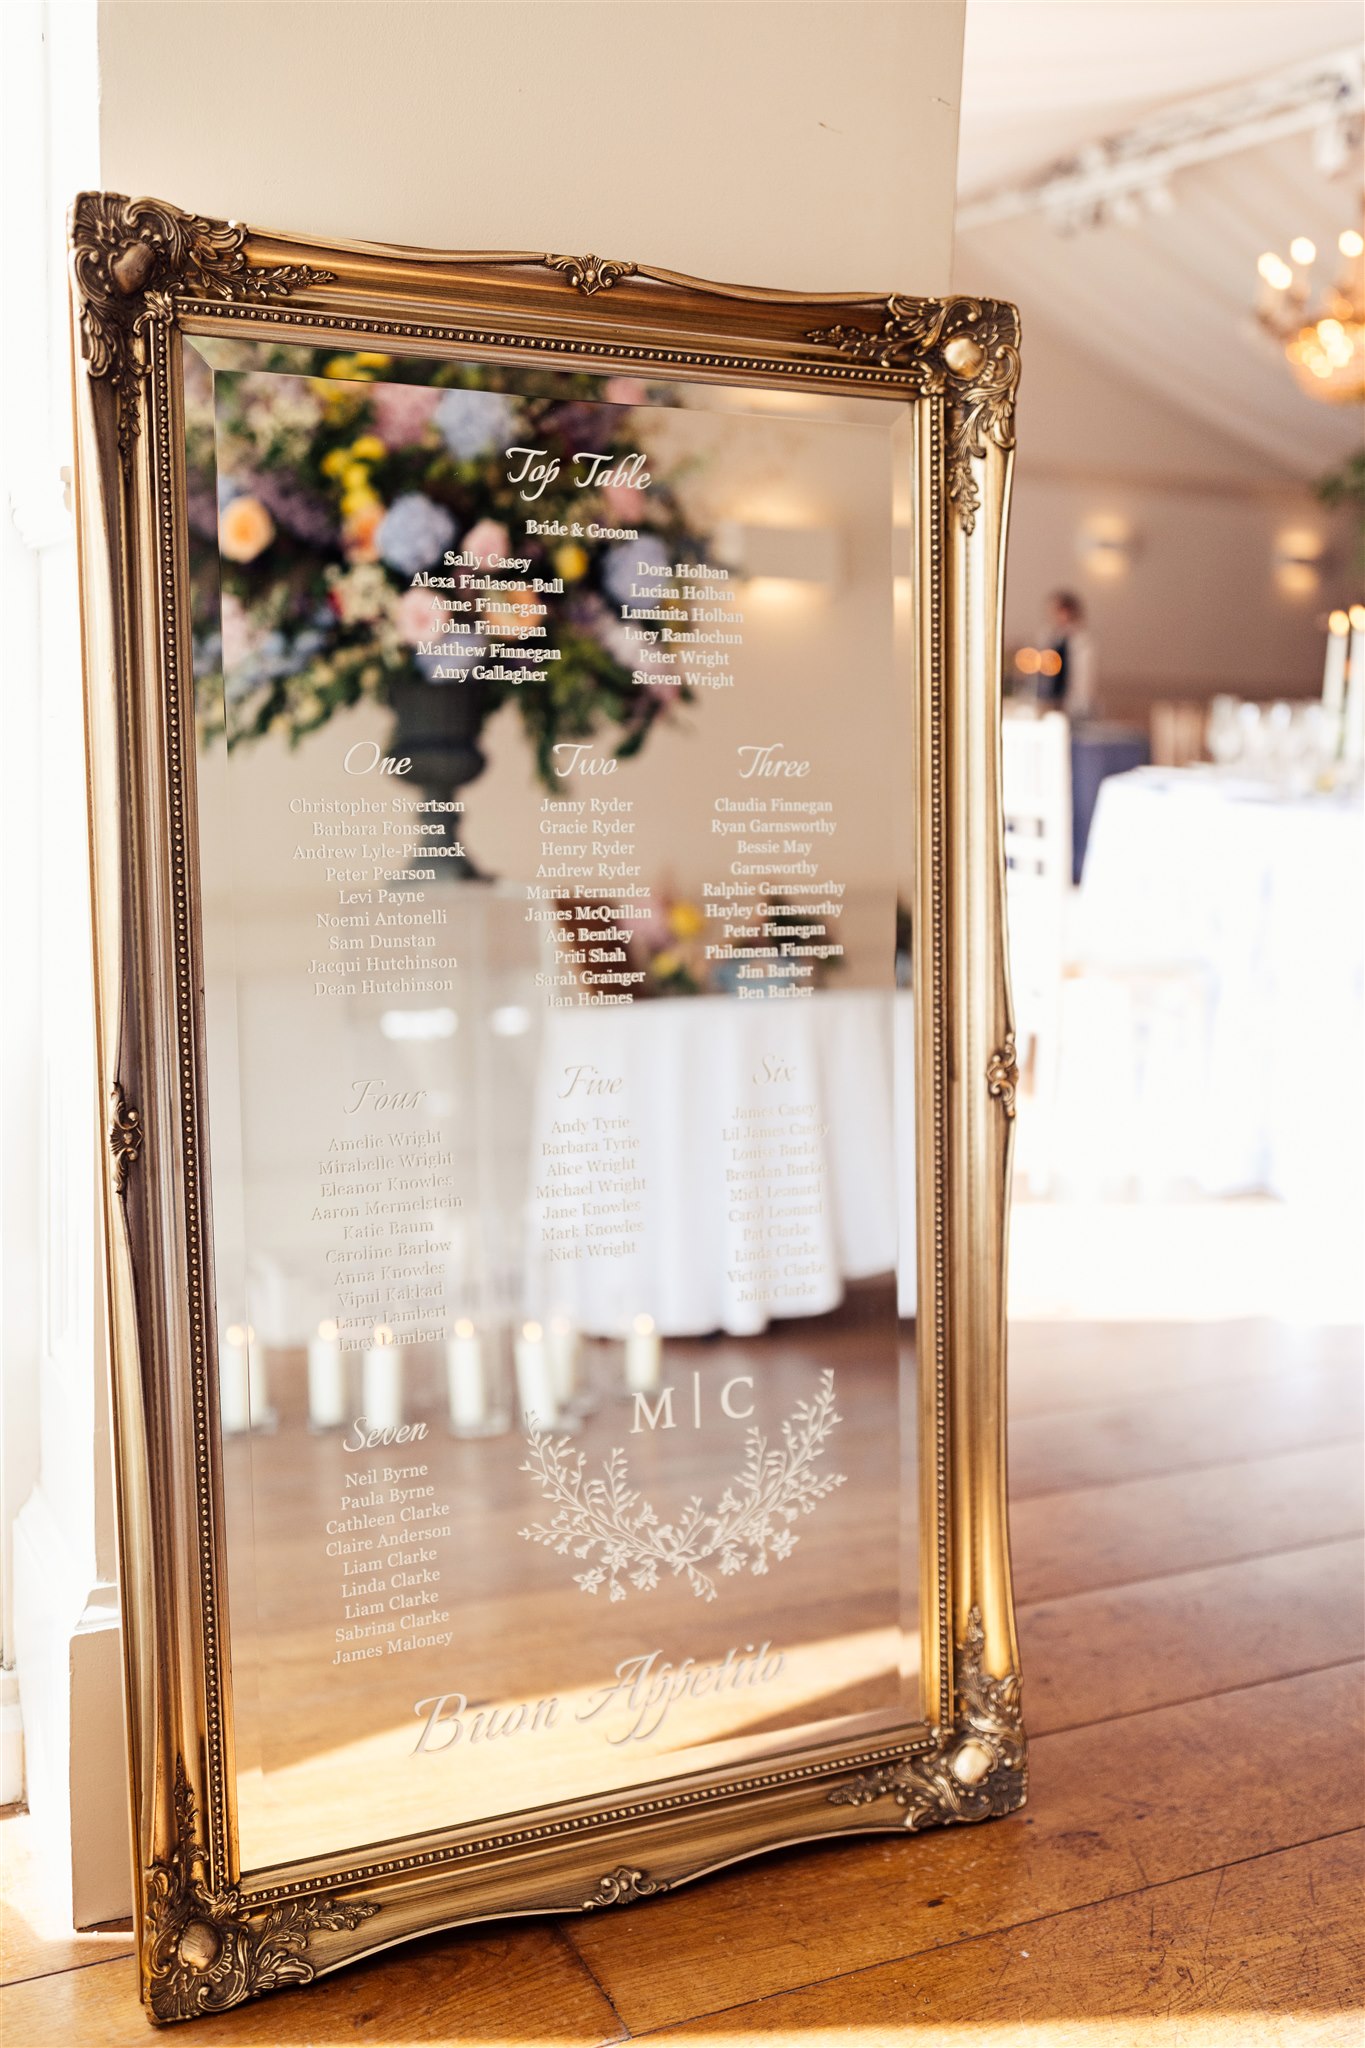 A huge mirror with a gilt gold frame stands on the floor in the entrance of a wedding marquee and is inscribed with a wedding table plan written in white script on the glass of the mirror itself